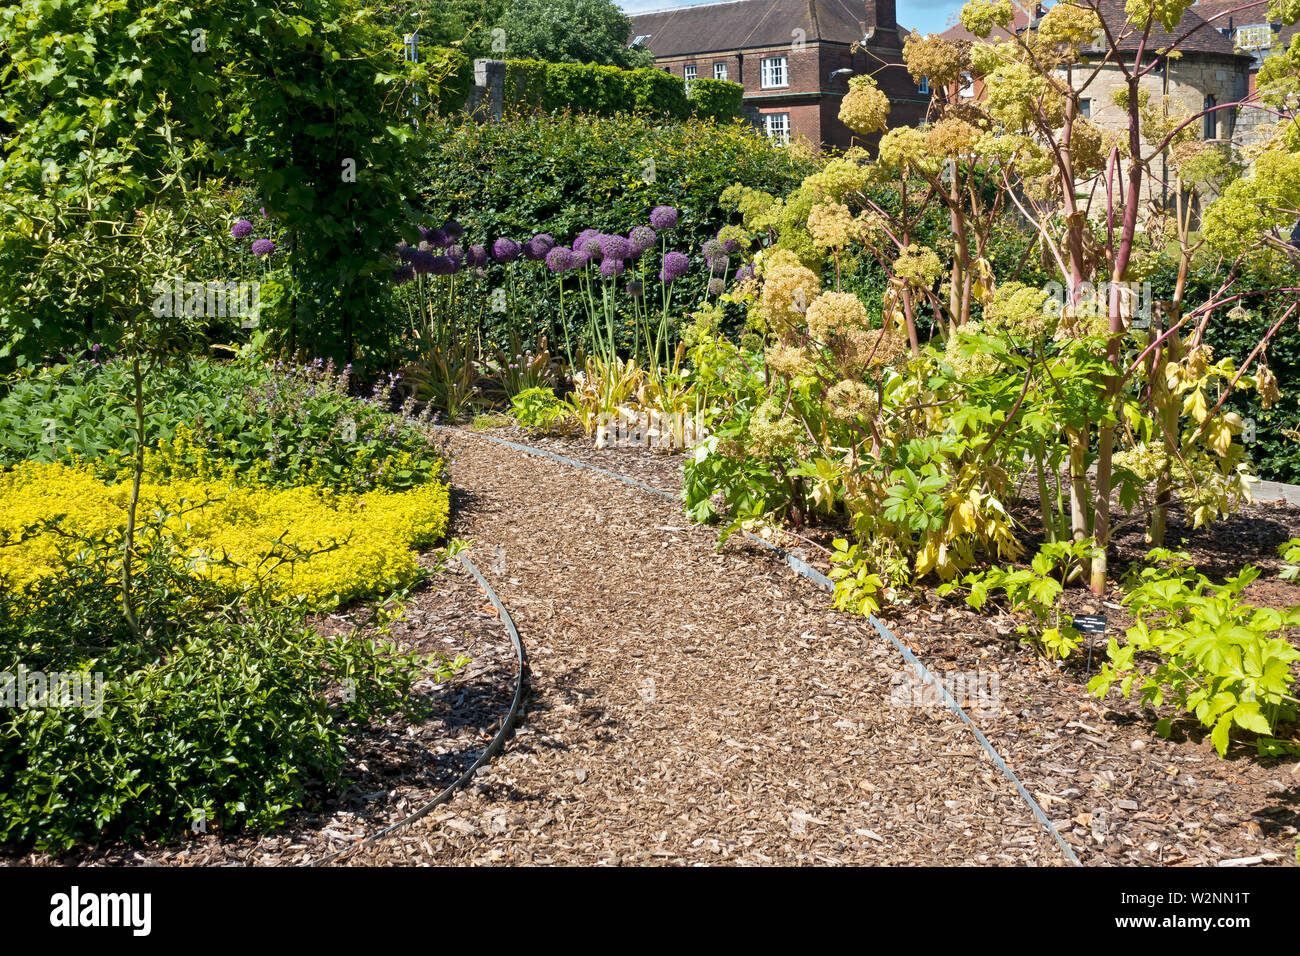 Garden path made from bark chippings with angelica archangelica and alliums growing in the borders in a cottage garden summer England UK Great Britain Stock Photo